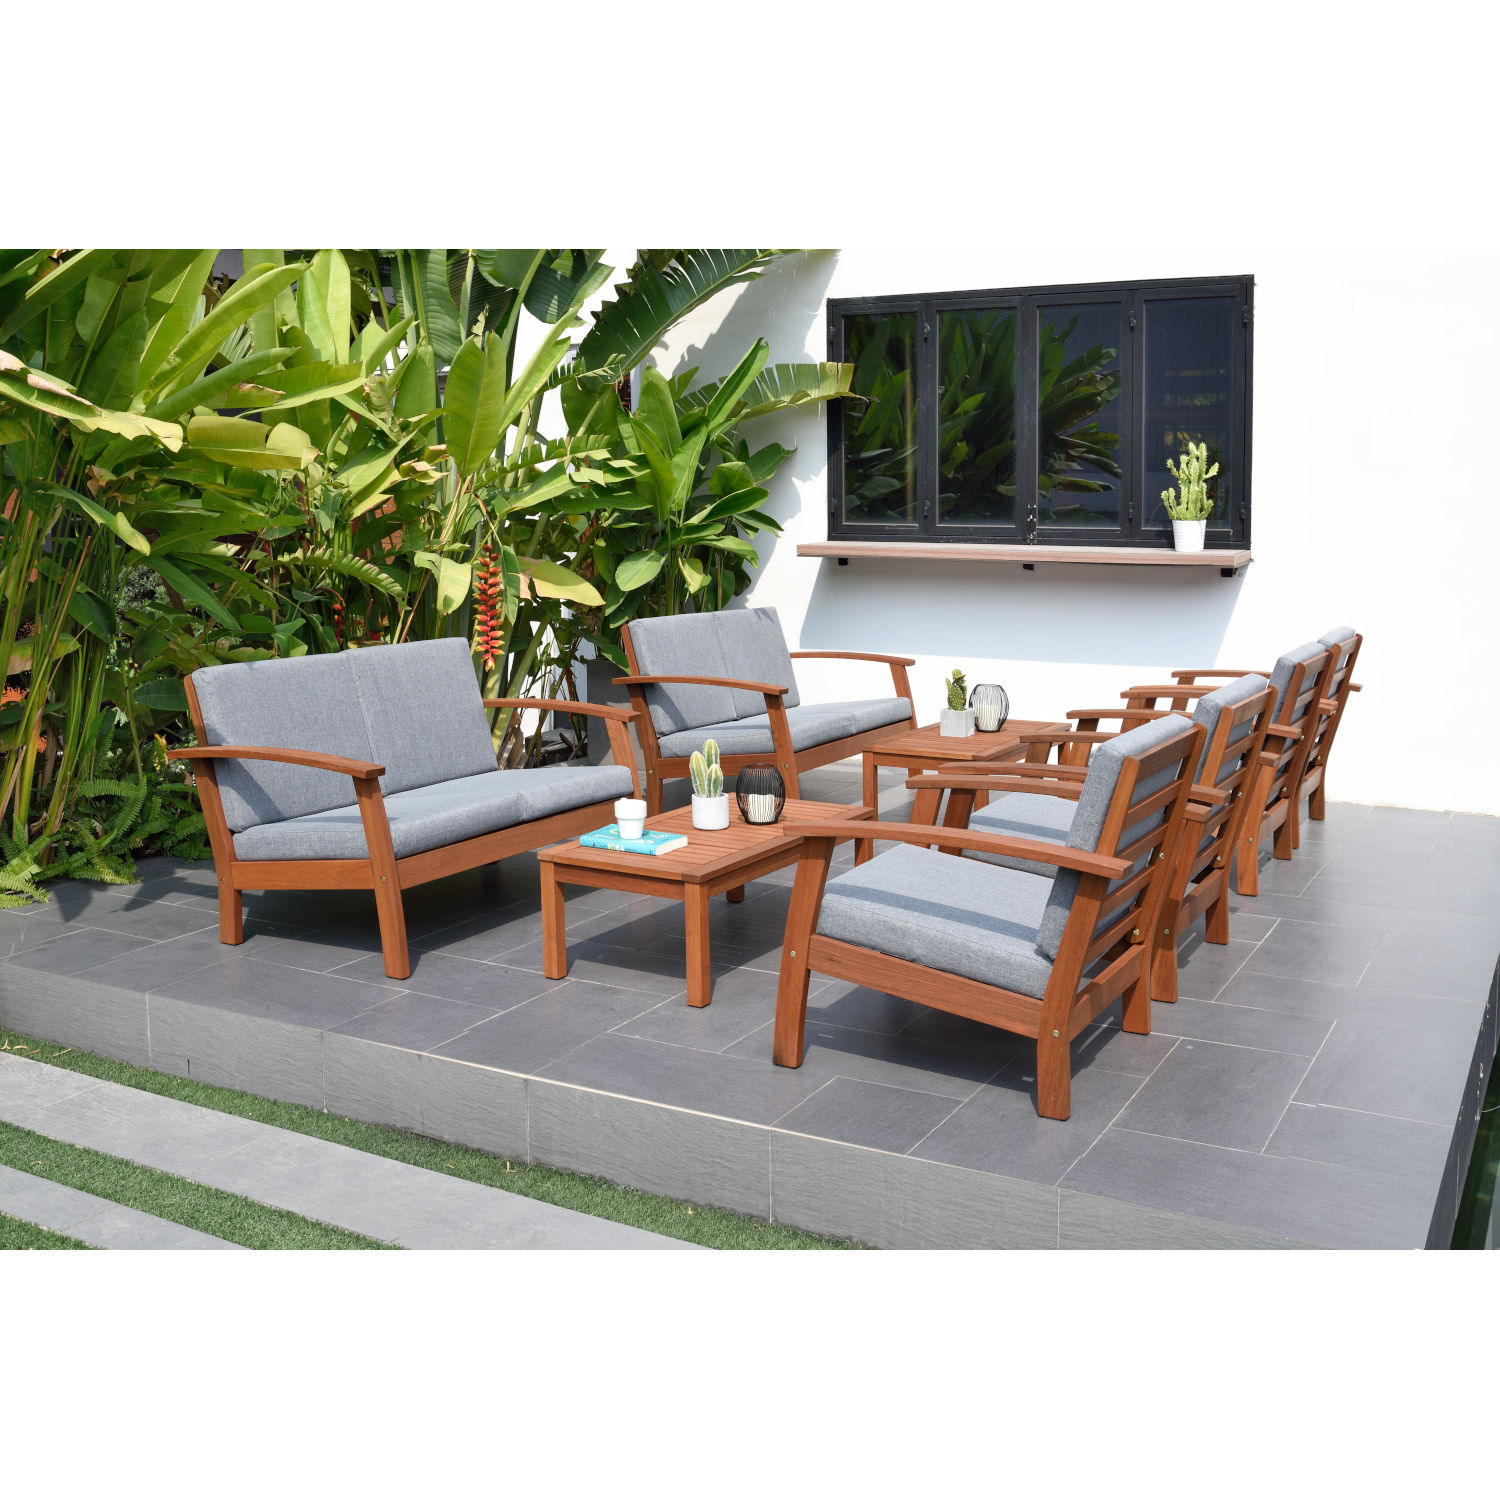 Patio Furniture Sets Category